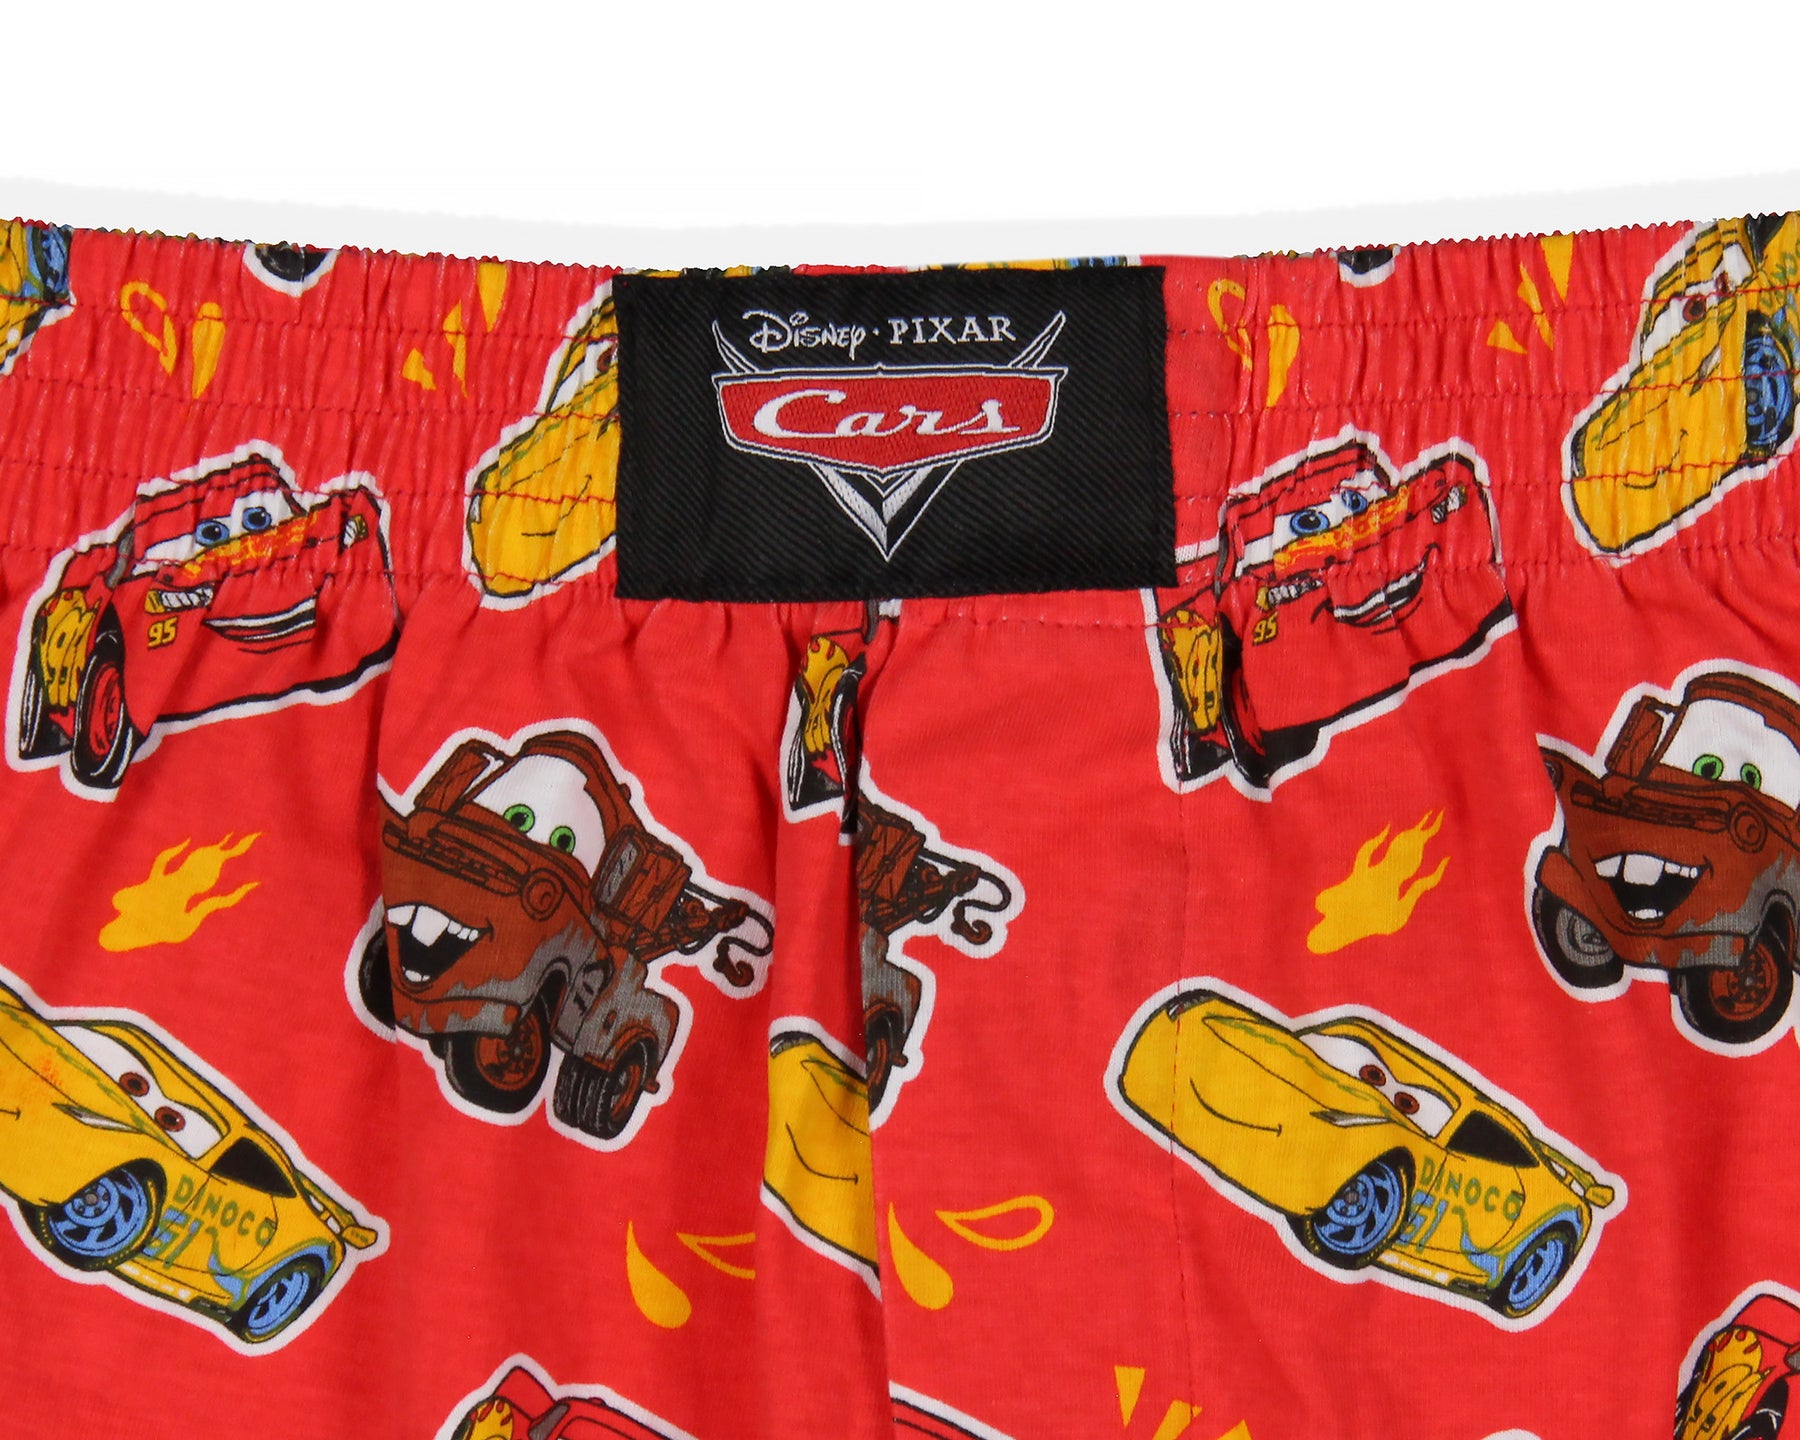 Kyle on X: The lightning mcqueen boxers stay ON during sex   / X